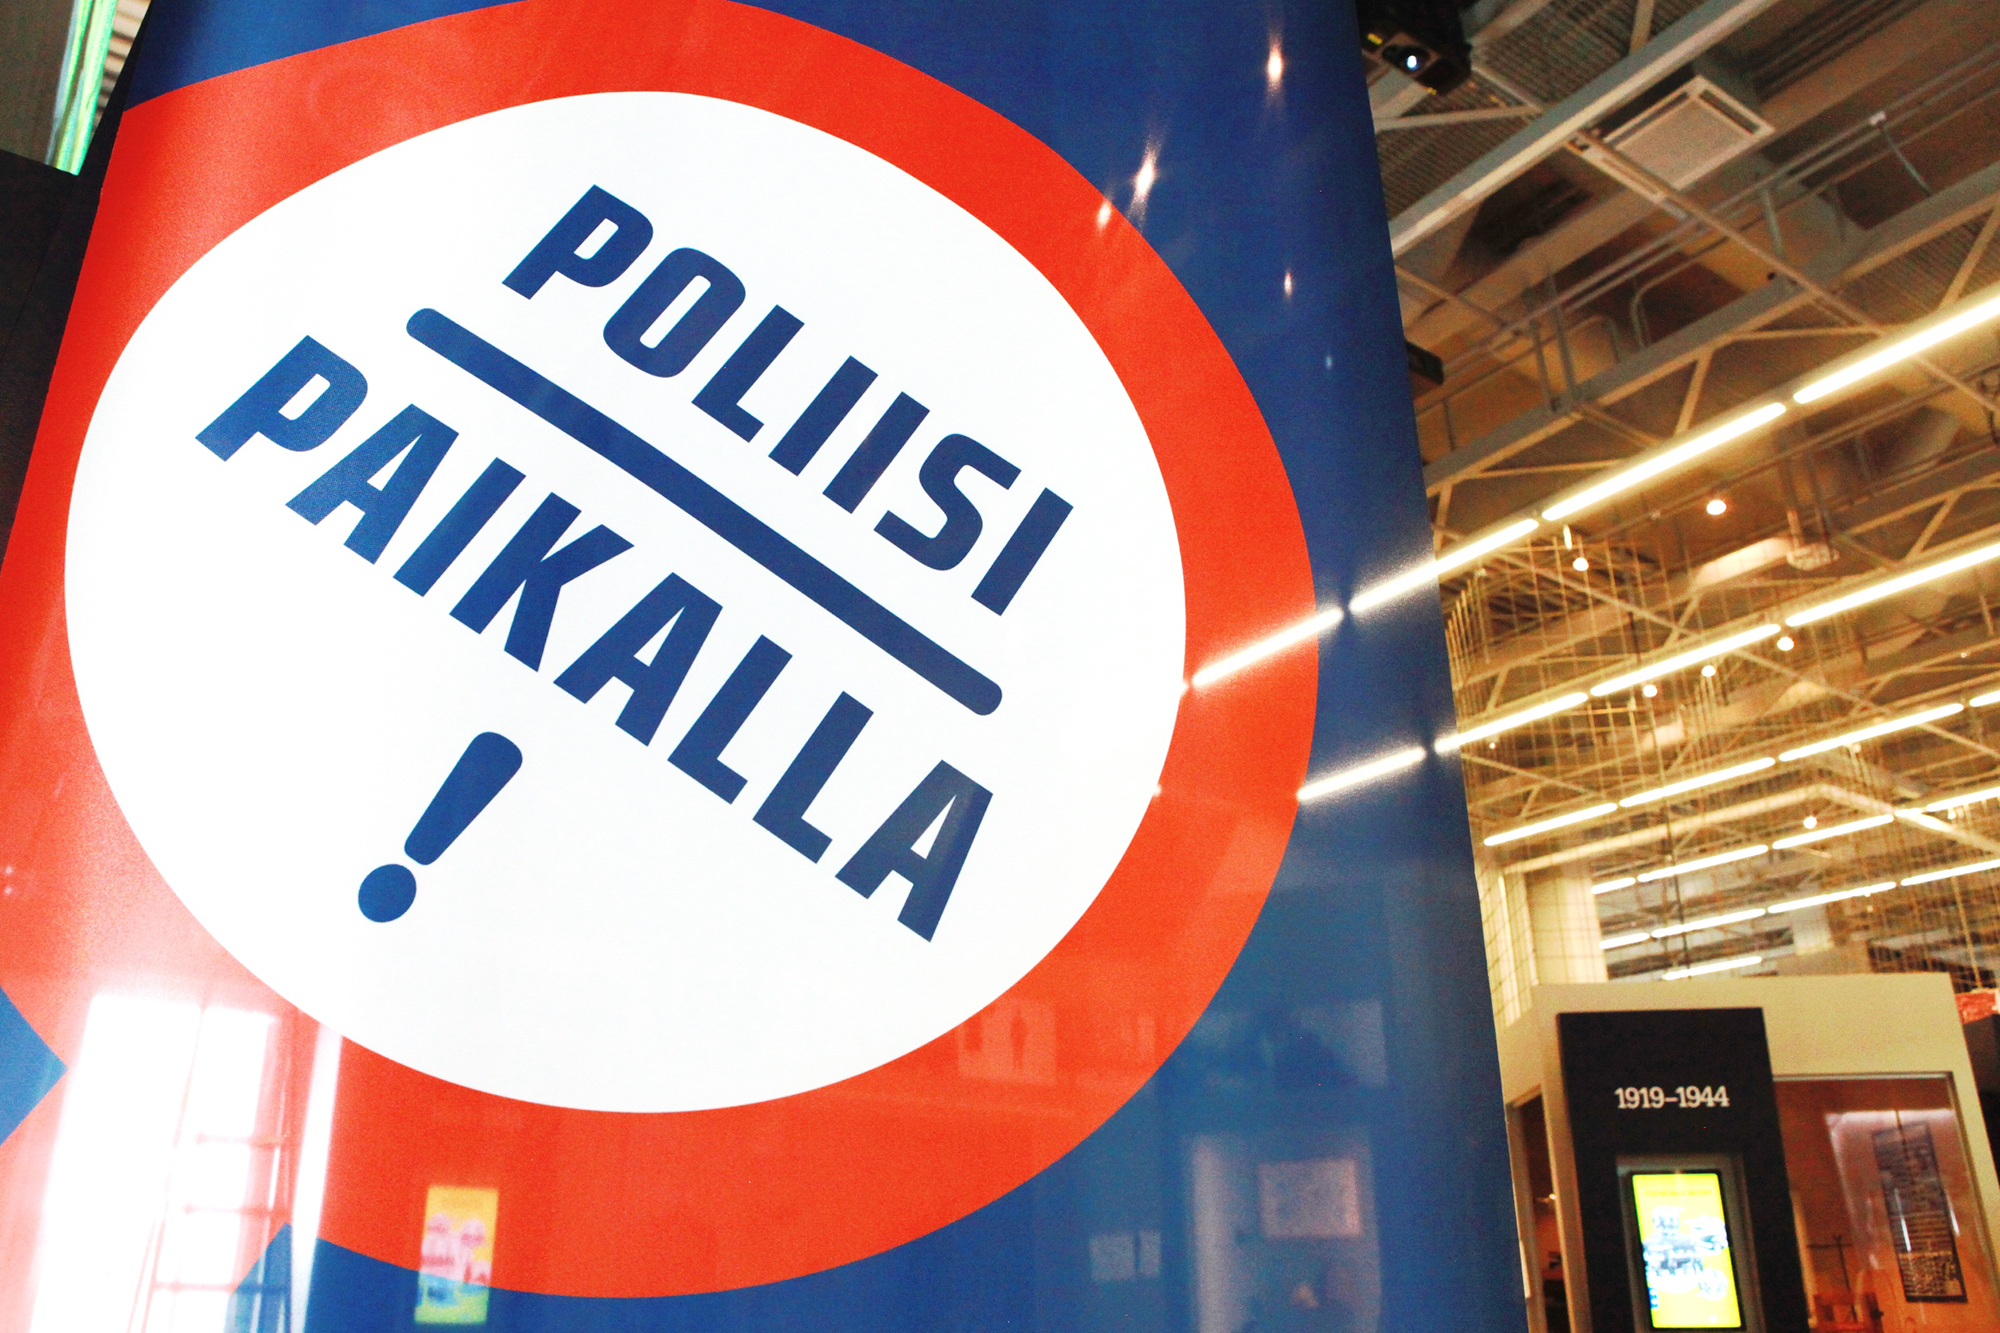 Exhibition logo in the museum facilities, with the text: Poliisi paikalla! (The Police is Here!). Photo The Police Museum